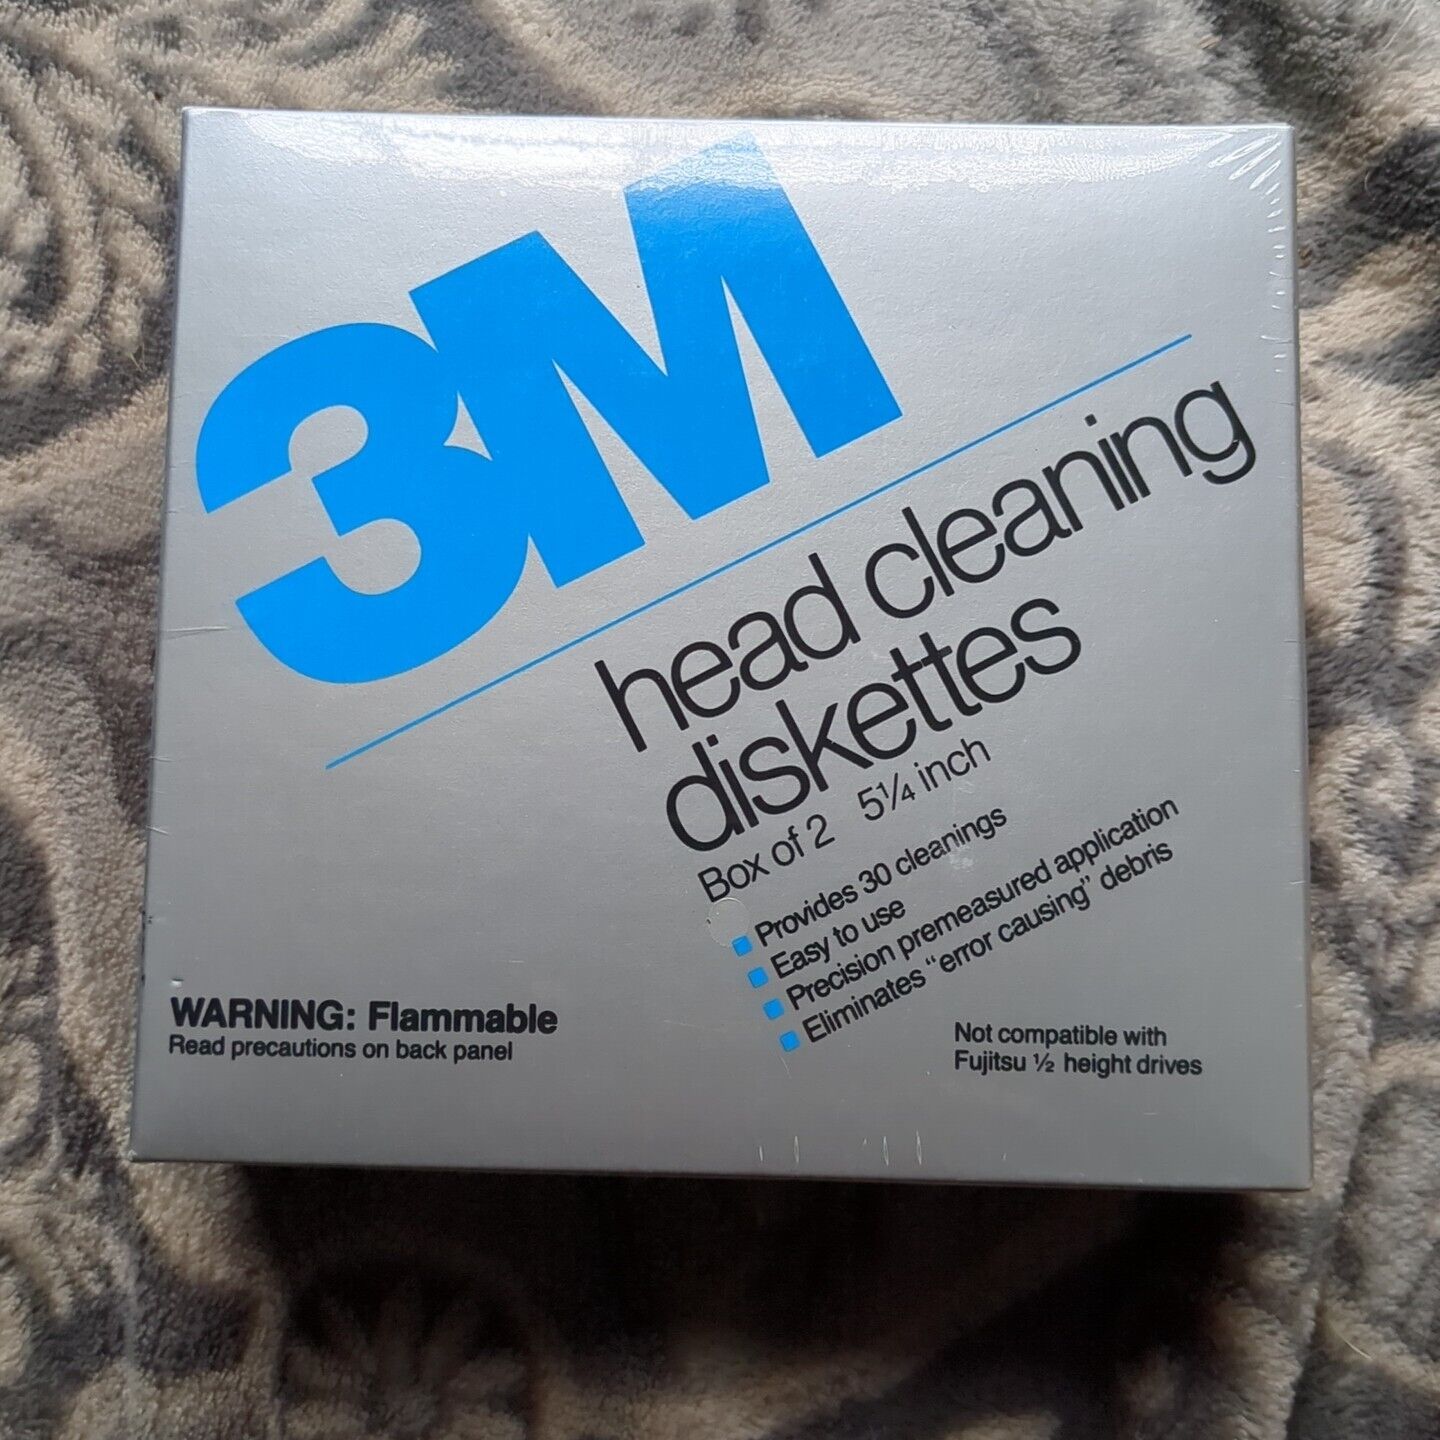 New Sealed 3M Head Cleaning Diskette Kit Box of 2 x 5.25